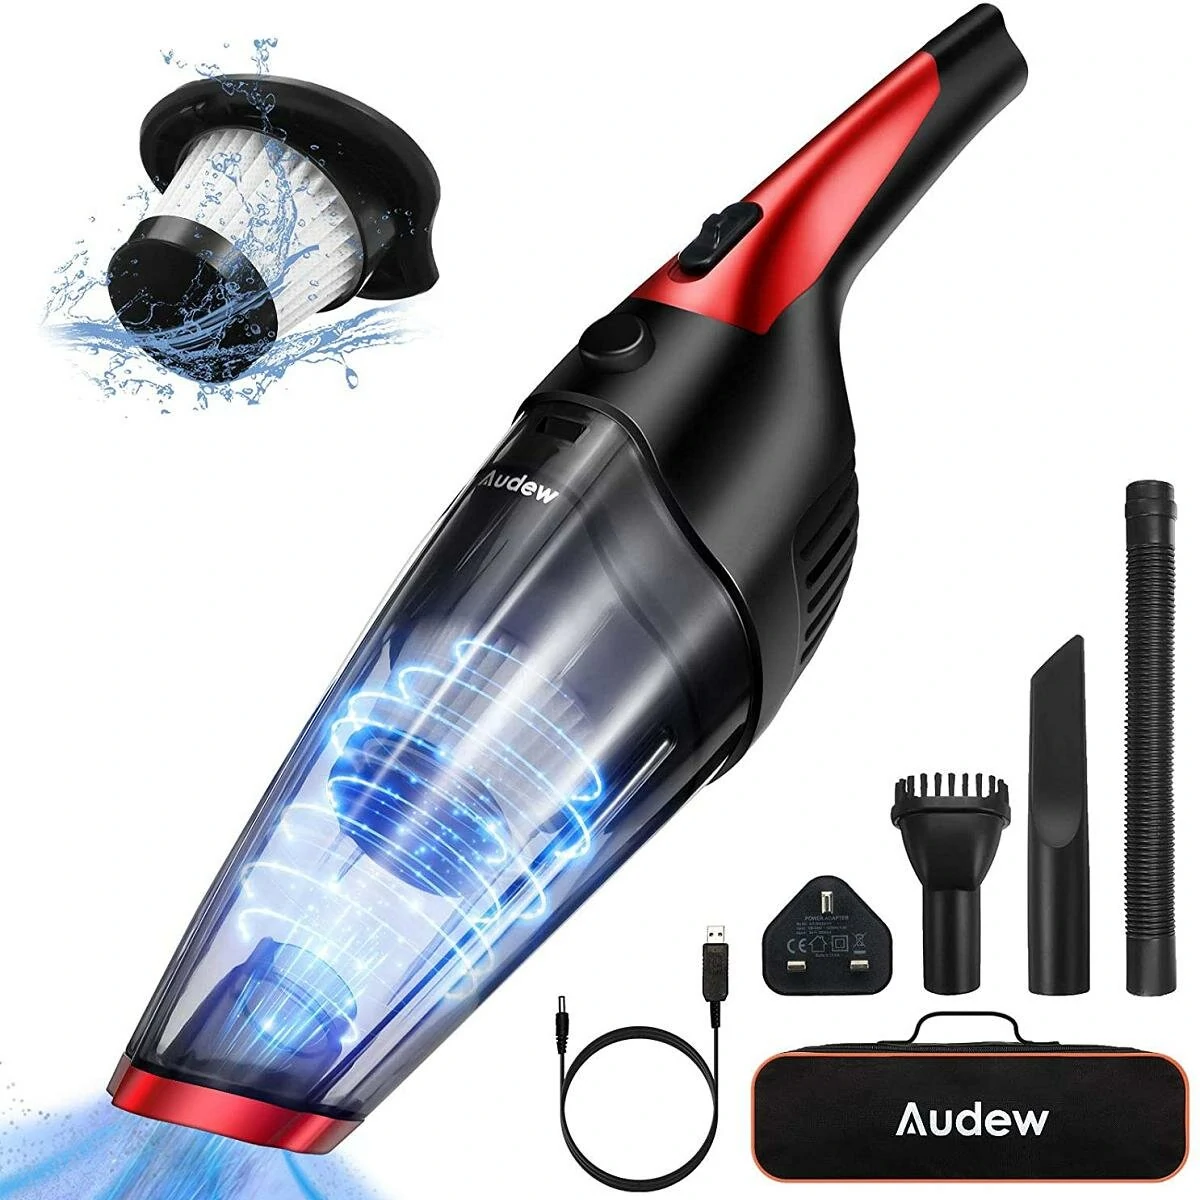 Audew 7000Pa Wireless Handheld Car Cleaning Vacuum Cleaner Filter Washable Low Noise Rechargeable Pet Hair - EU Plug